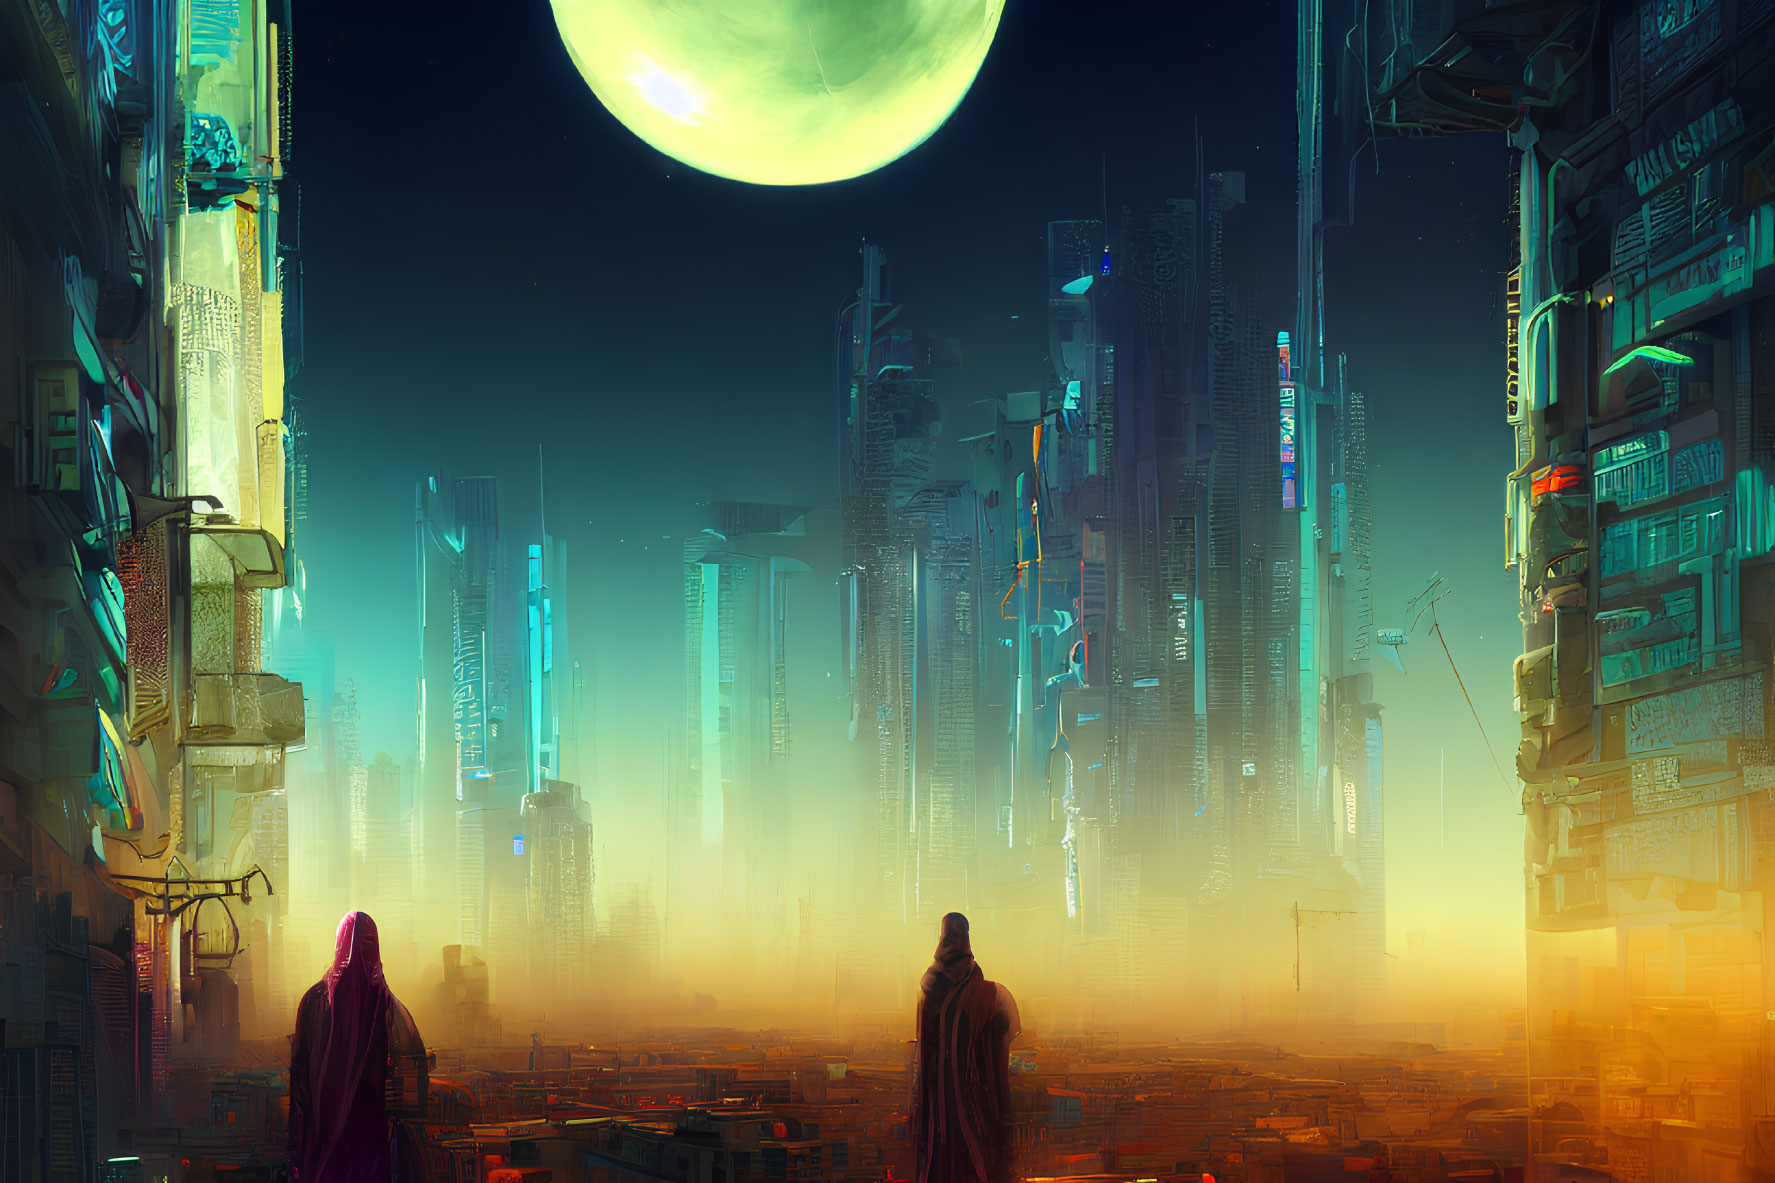 Neon-lit futuristic cityscape with figures and green moon